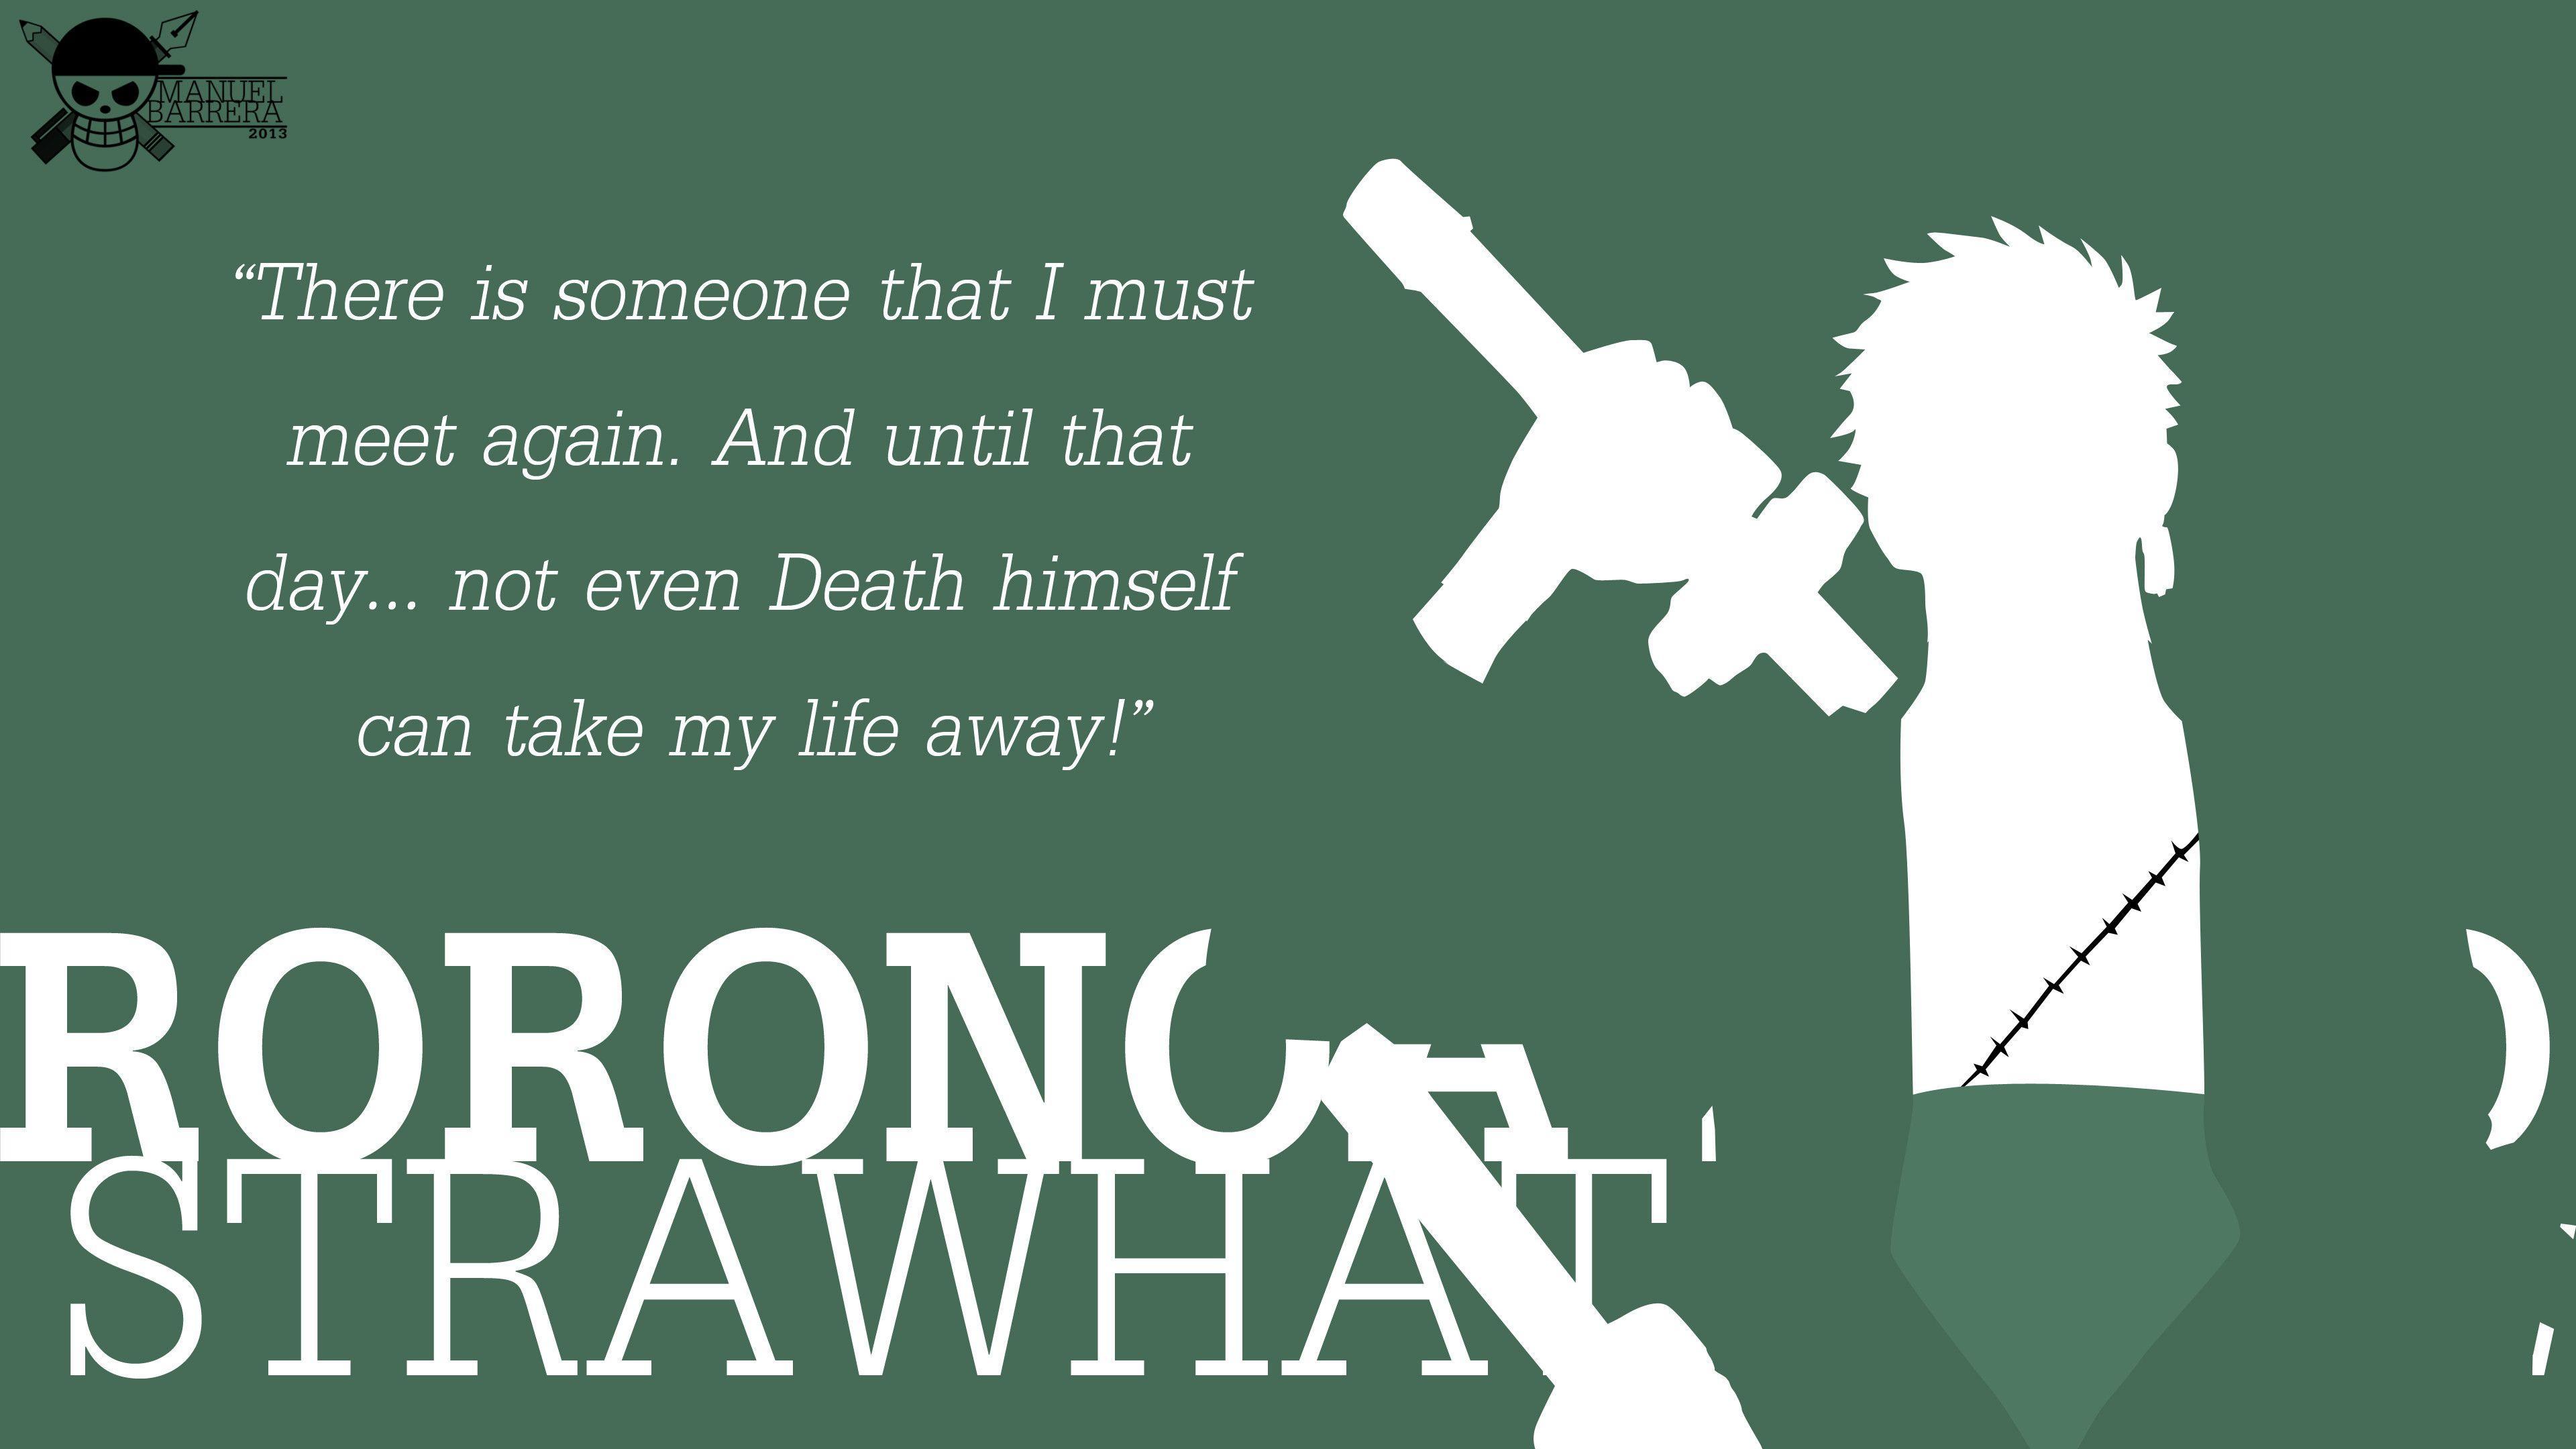 One Piece Quotes Wallpapers - Top Free One Piece Quotes Backgrounds